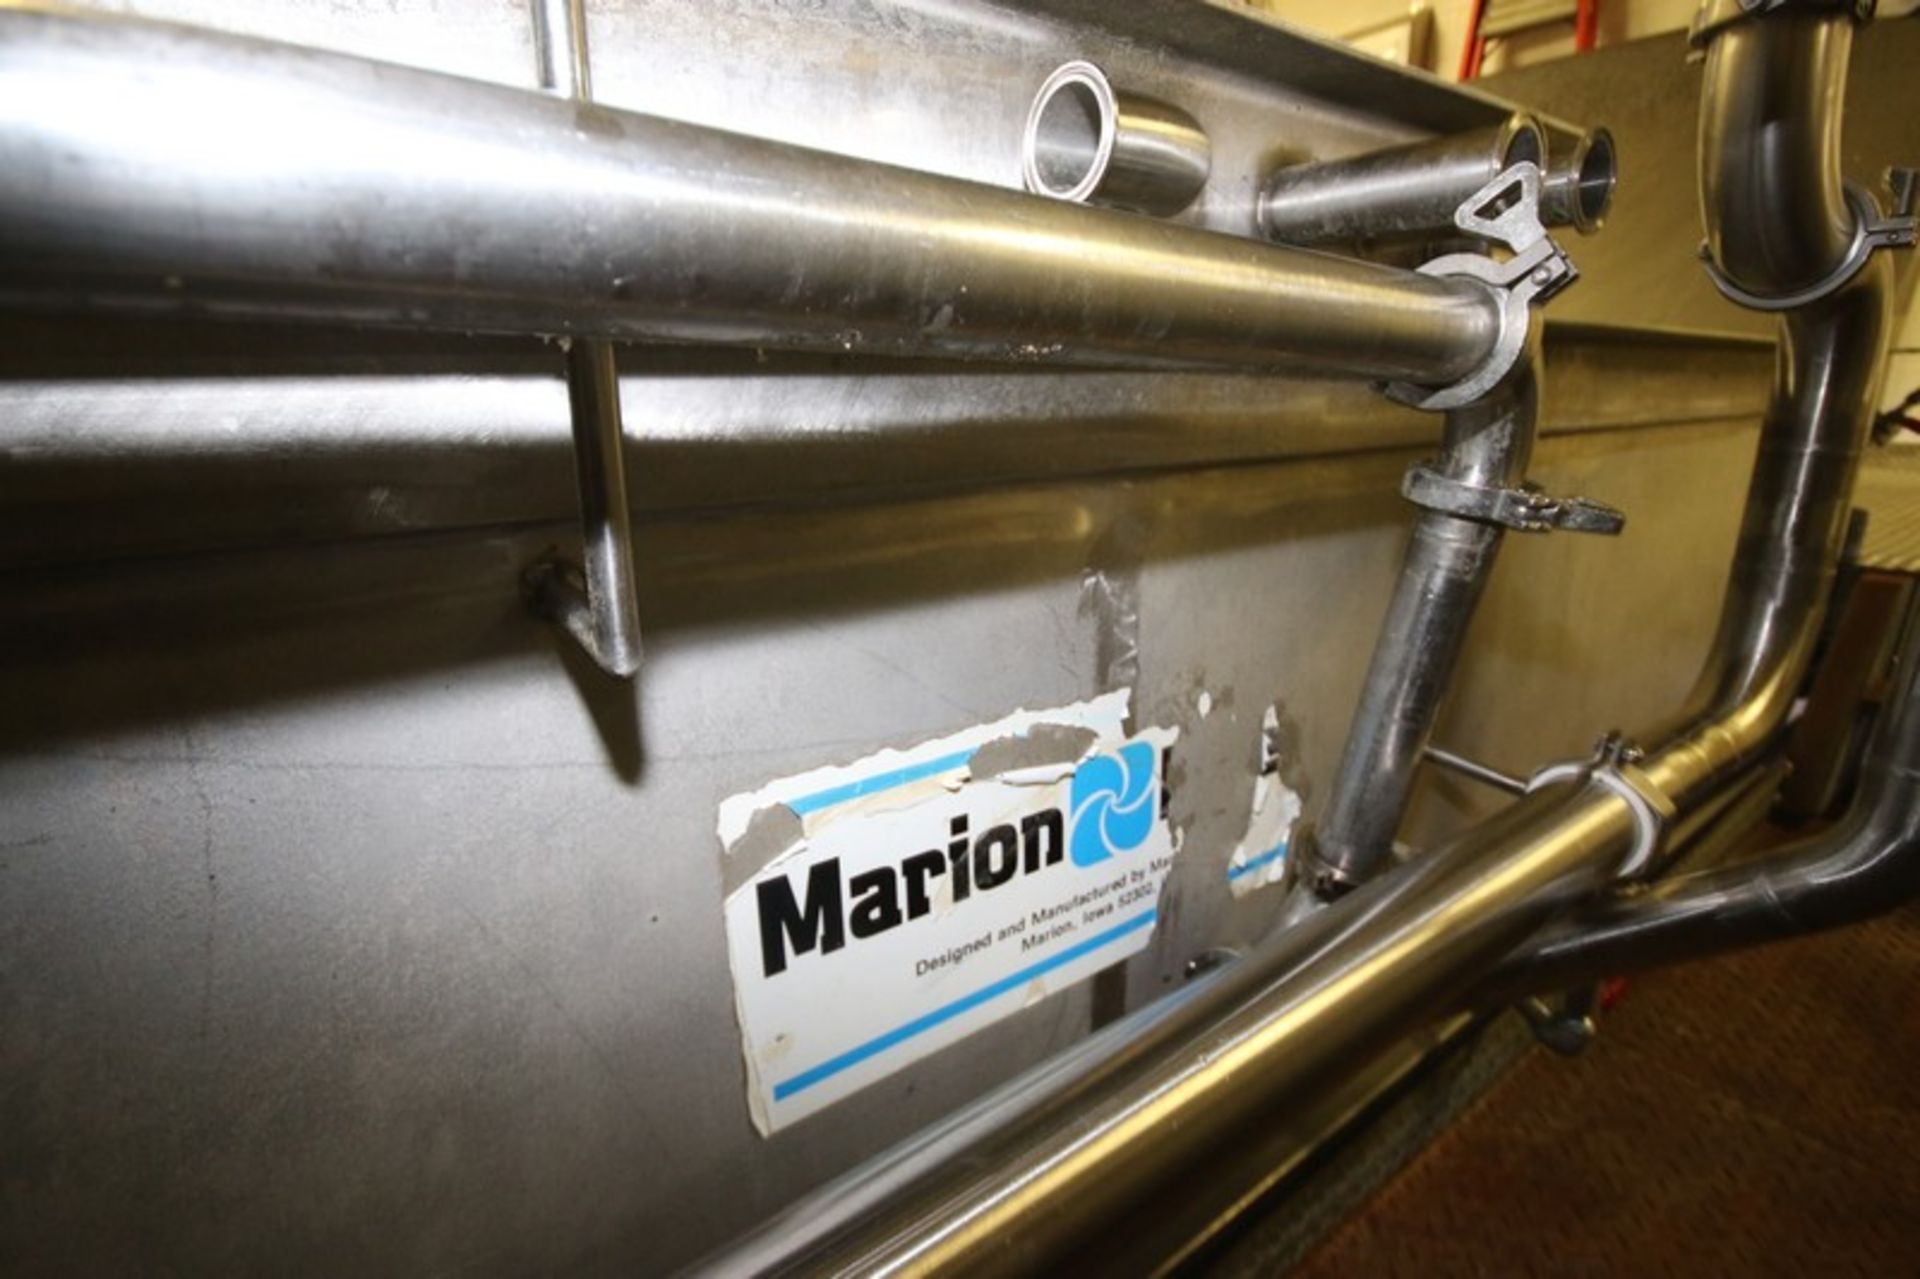 Marion S/S Paddle Blender, M/N SPX144, S/N 90077, Internal Blending Compartment Dims.: Aprox. 144" L - Image 5 of 23